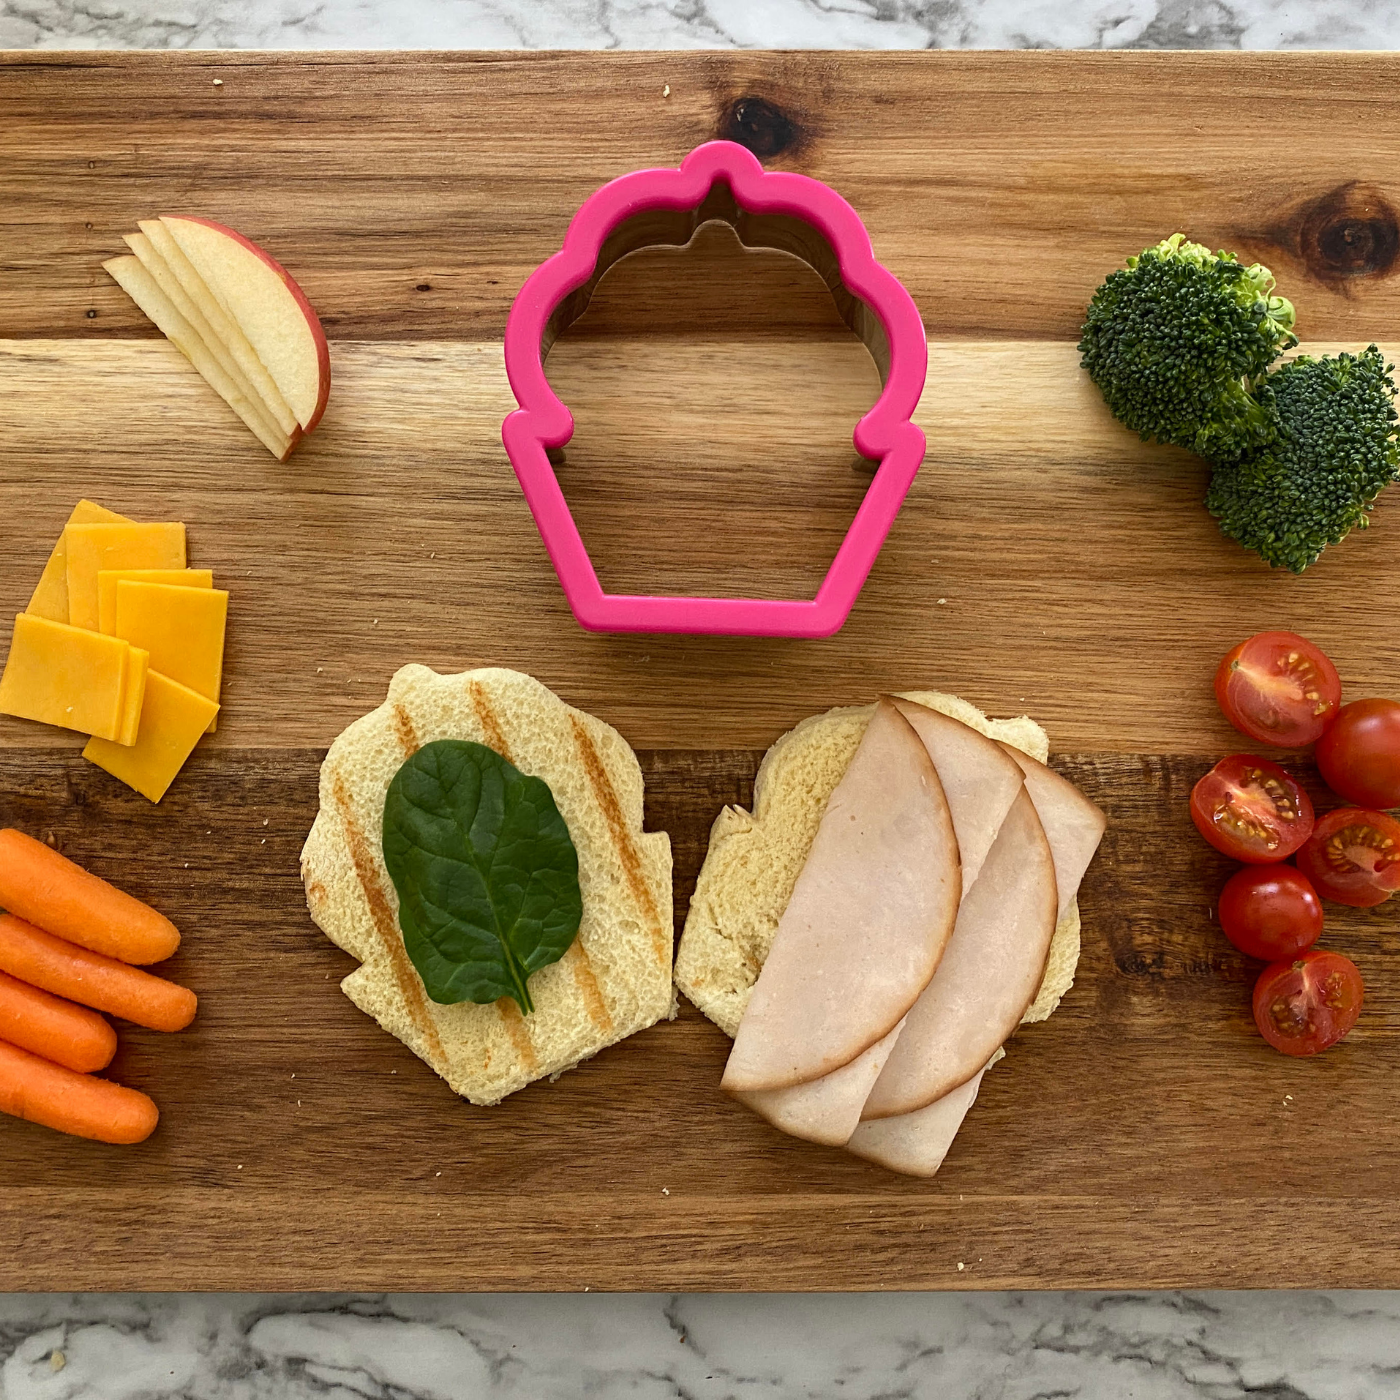 Lifestyle photo of stainless steel cupcake shaped cookie cutter along with meat, cheese, and vegetables to assemble a cupcake shaped sandwich.